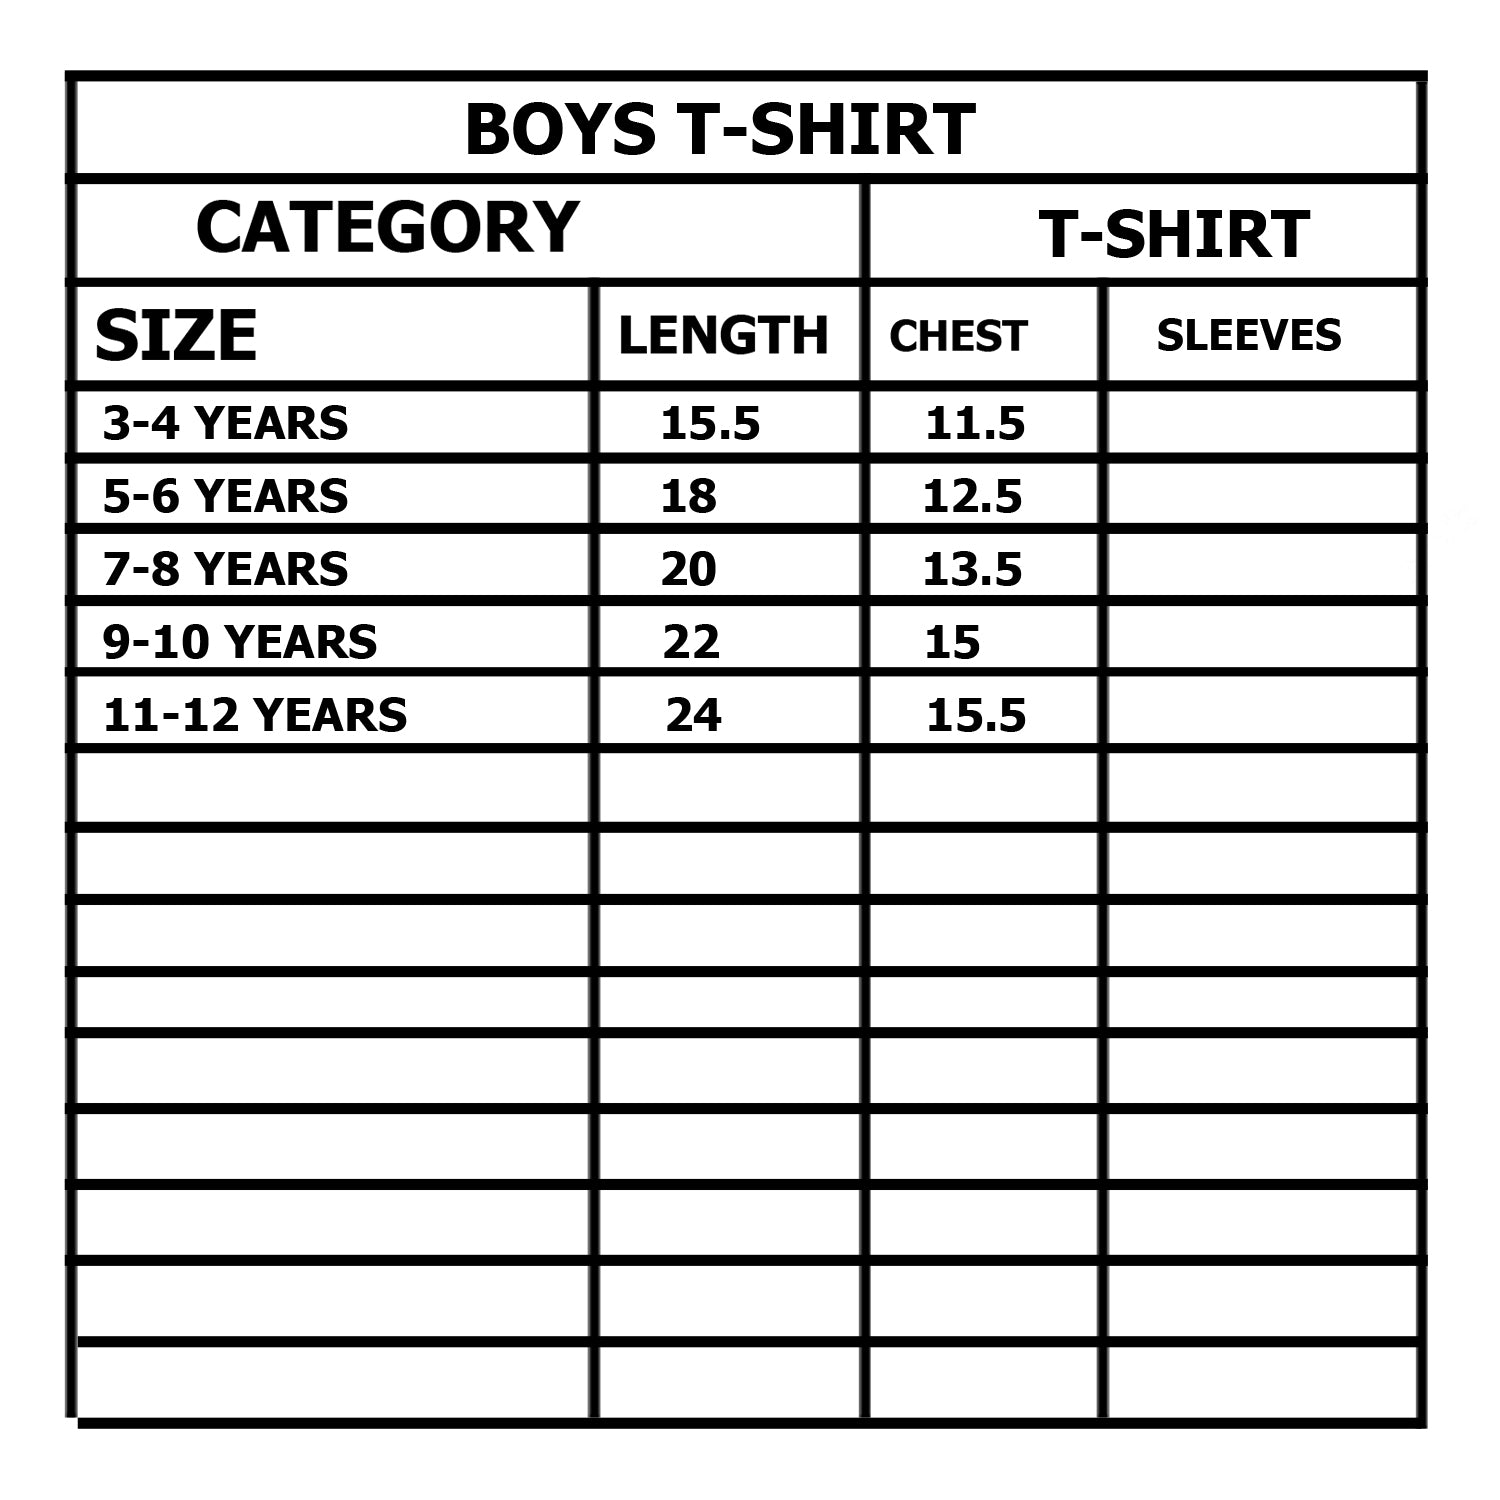 WHITE LIFE IS LIKE GAME PRINTED HALF SLEEVES T-SHIRT FOR BOYS